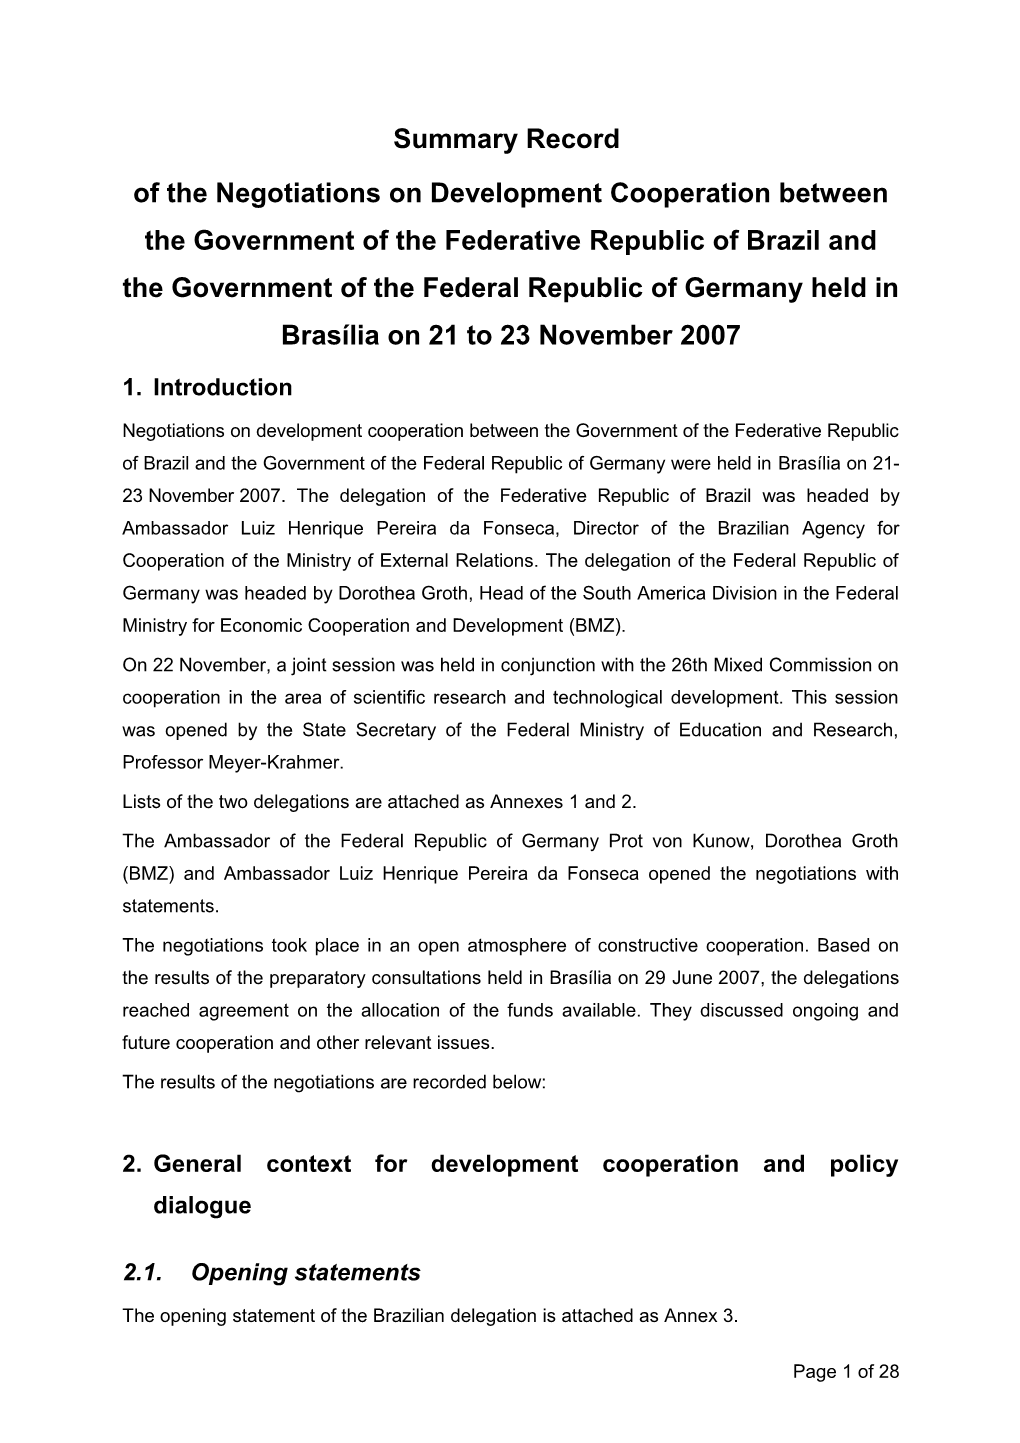 Of the Negotiations on Development Cooperation Between the Government of the Federative